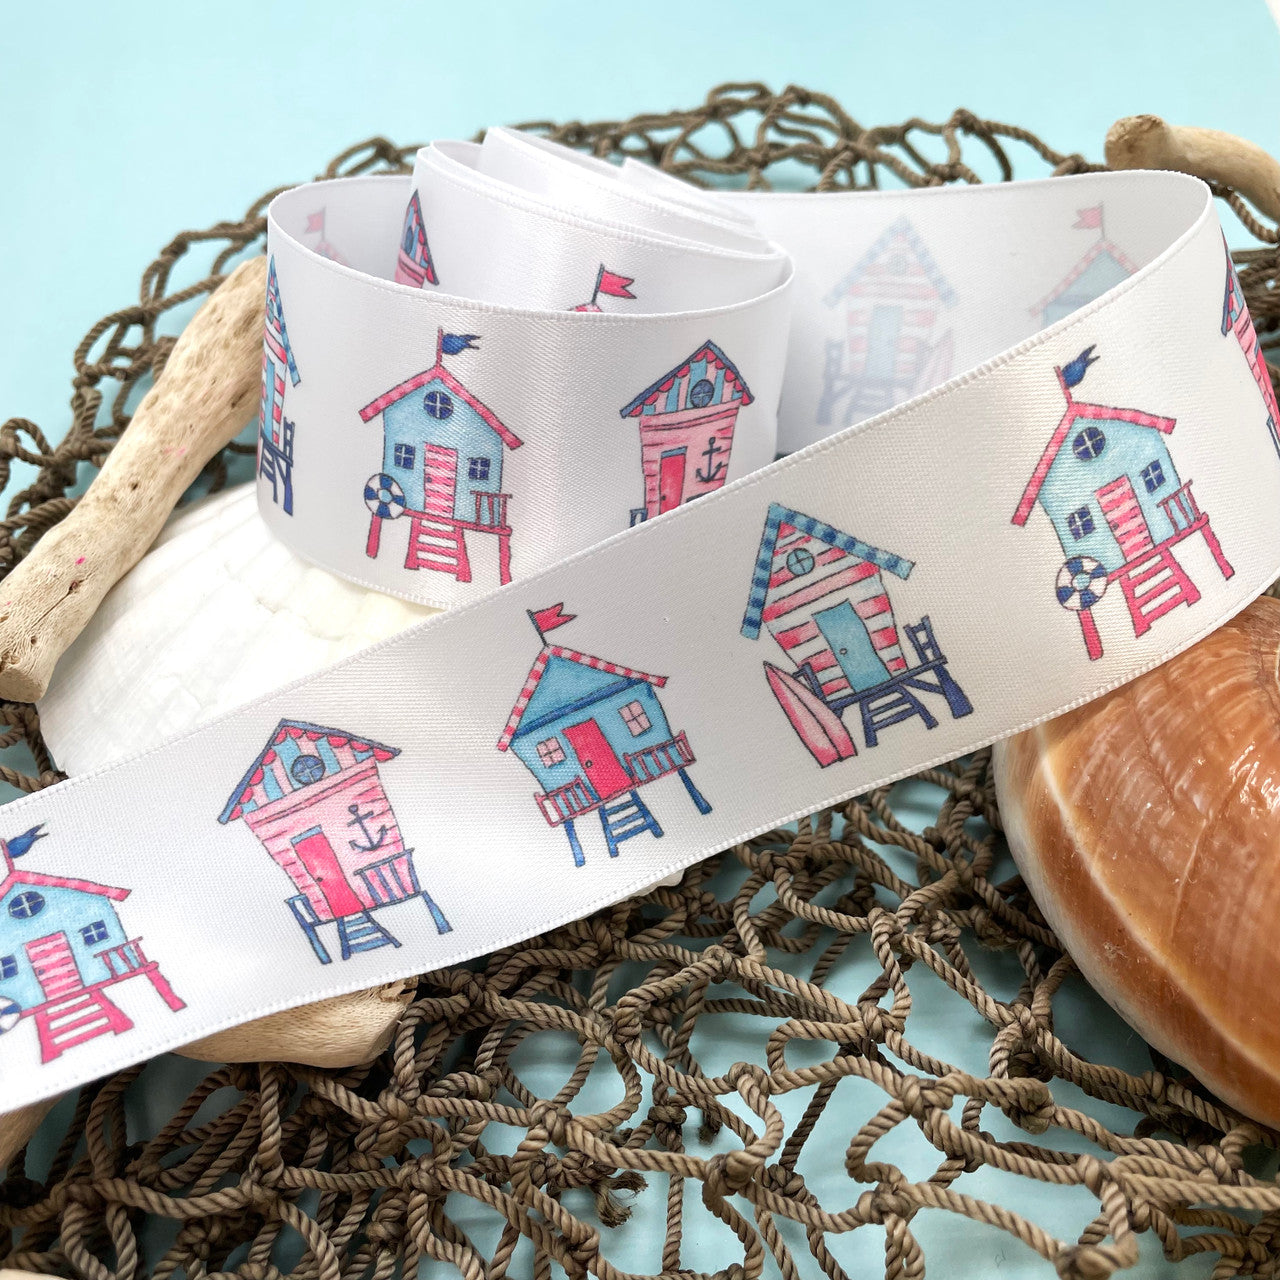 Our adorable beach shack ribbon will spark the creativity of crafters for hair bows, head bands, scrap books and quilting projects!